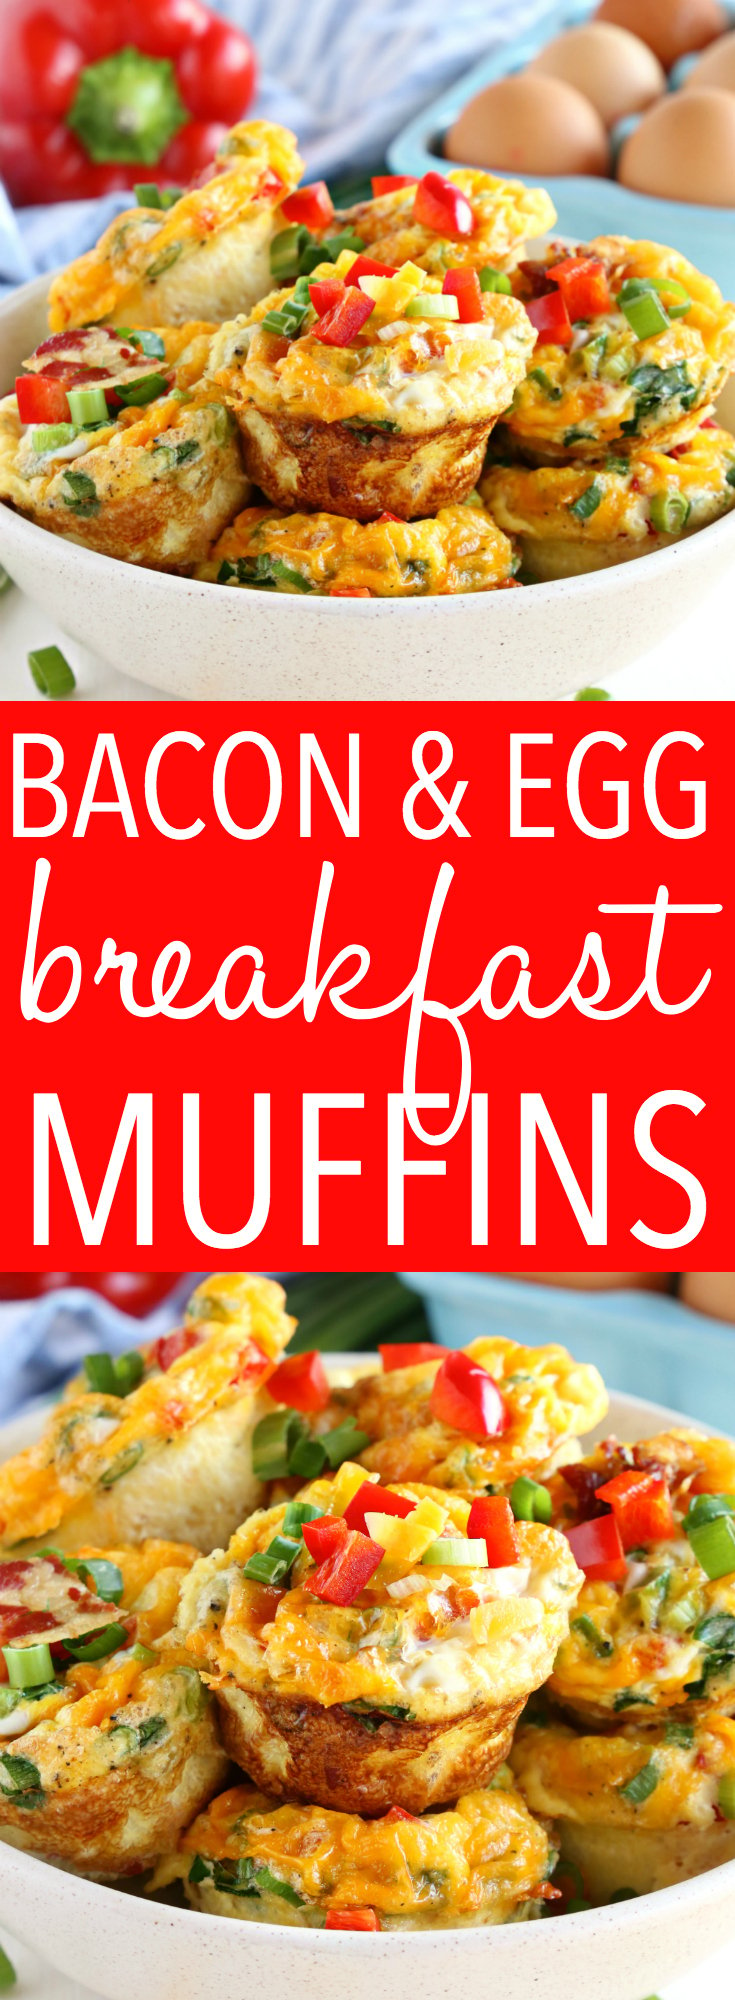 These Bacon and Egg Breakfast Muffins are the perfect make-ahead breakfast for busy mornings! They're packed with veggies and all your favourite breakfast flavours! Recipe from thebusybaker.ca! #muffins #eggmuffins #breakfastmuffins #breakfast #easy #mealprep #makeahead #leftovers #omlette #egg #protein #healthy #cleaneating #onthego #weightloss #lowcarb #keto via @busybakerblog